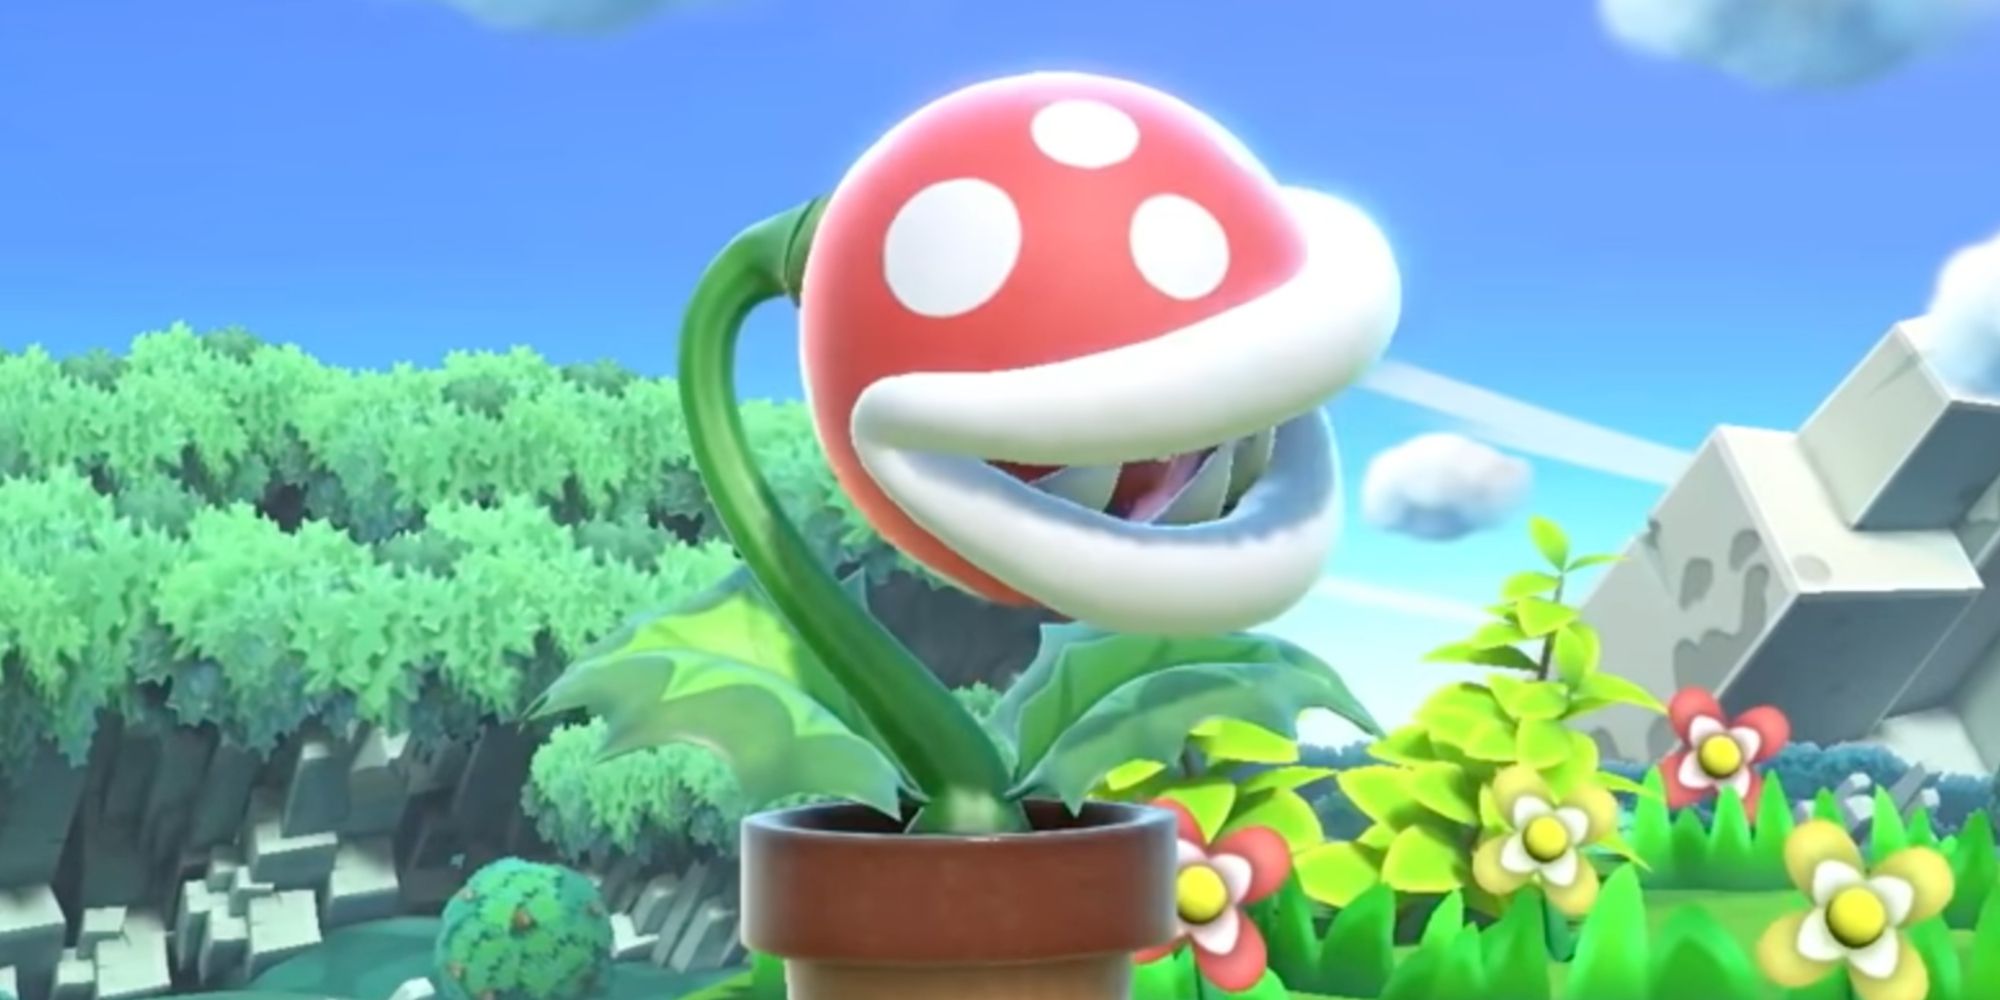 Piranha Plant from Super Mario Series and Super Smash Brothers Ultimate